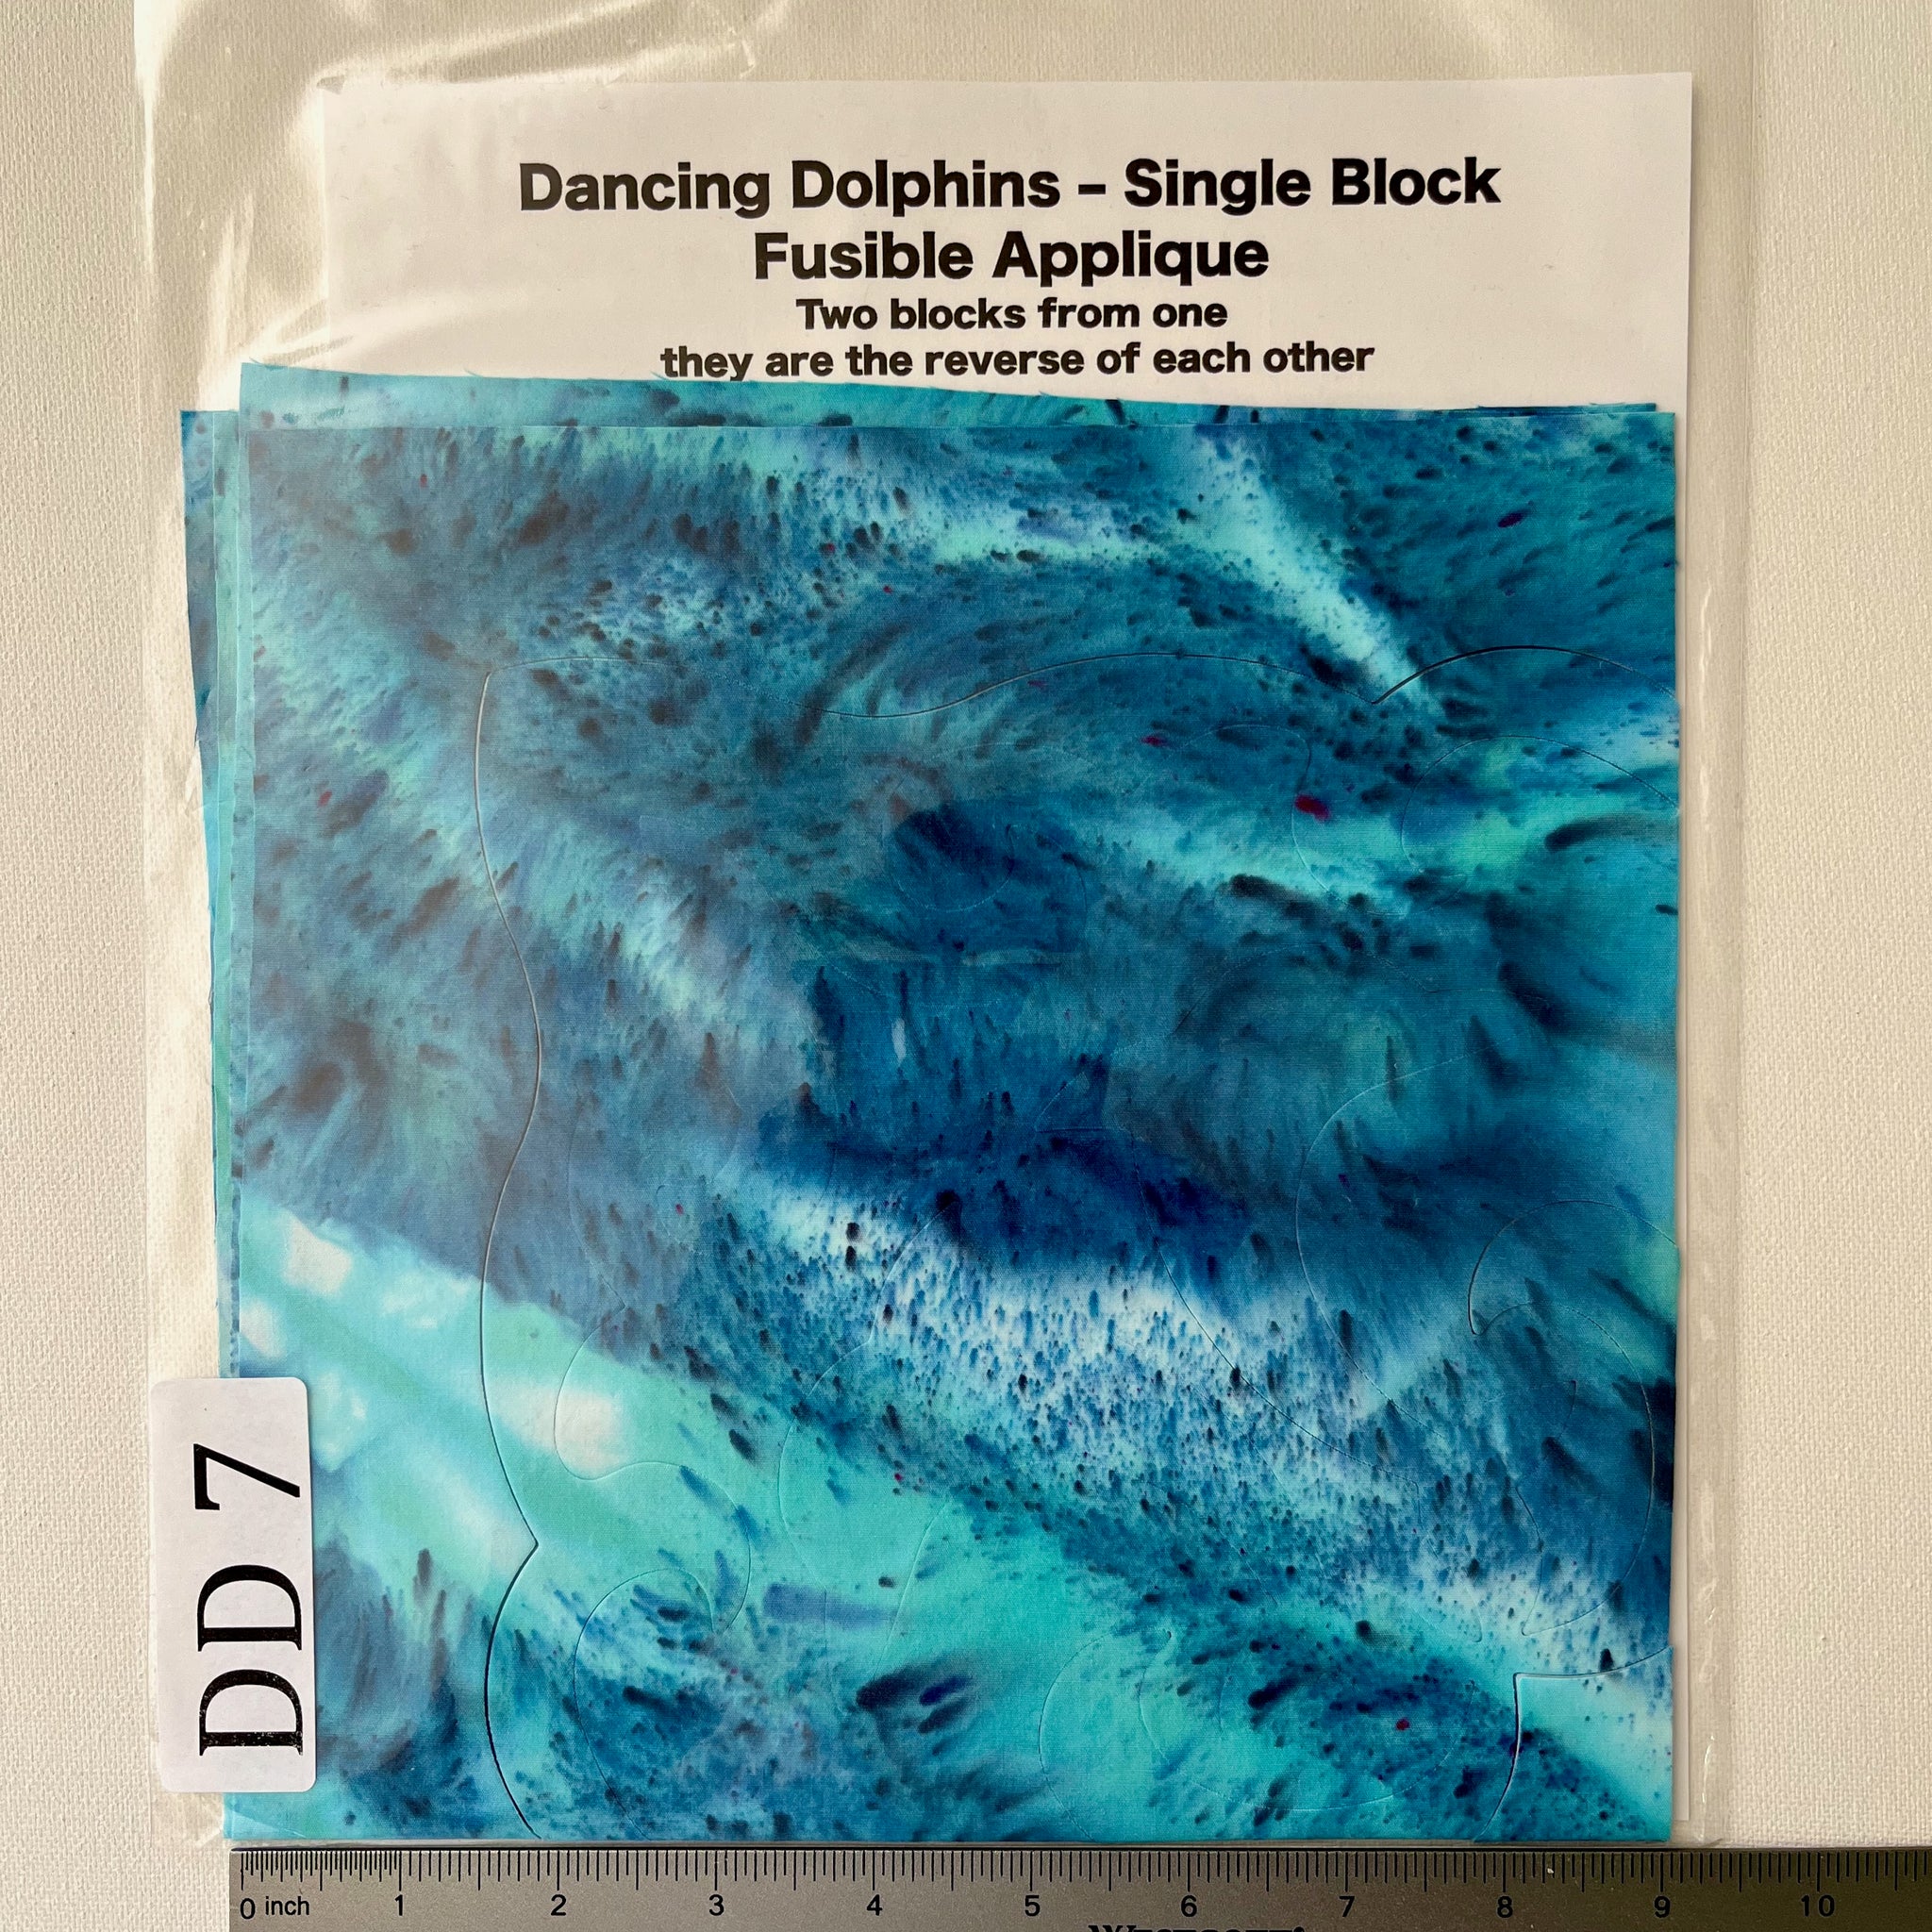 Dancing Dolphins Fusible Applique block made from Gabriele's hand dyed cotton-DD7